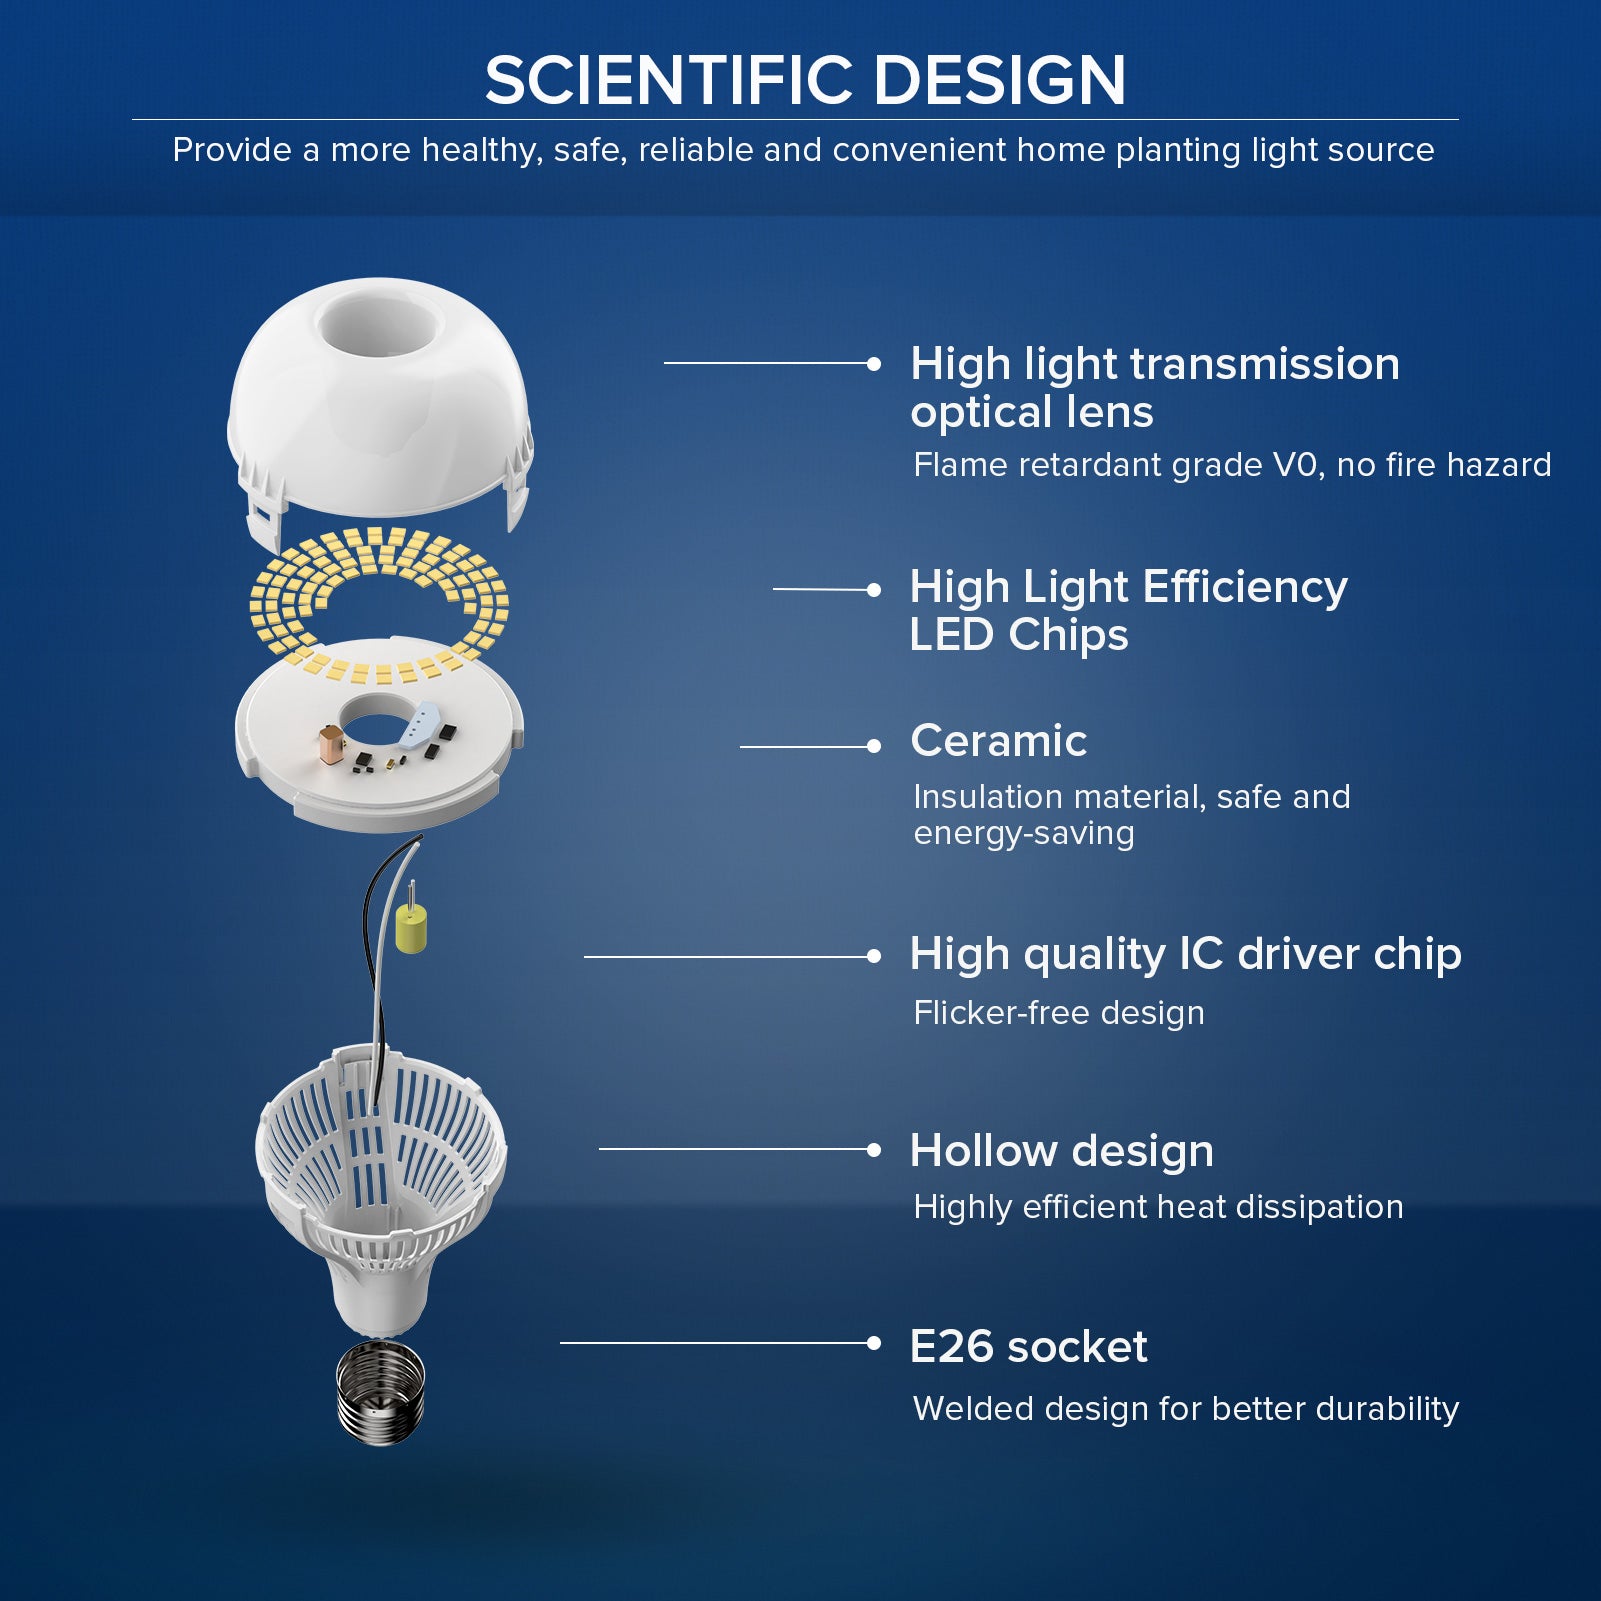 Upgraded A21 18W led light bulb  with hollow design, ceramic patented technology, high quality IC chips and high light transmission optical lens